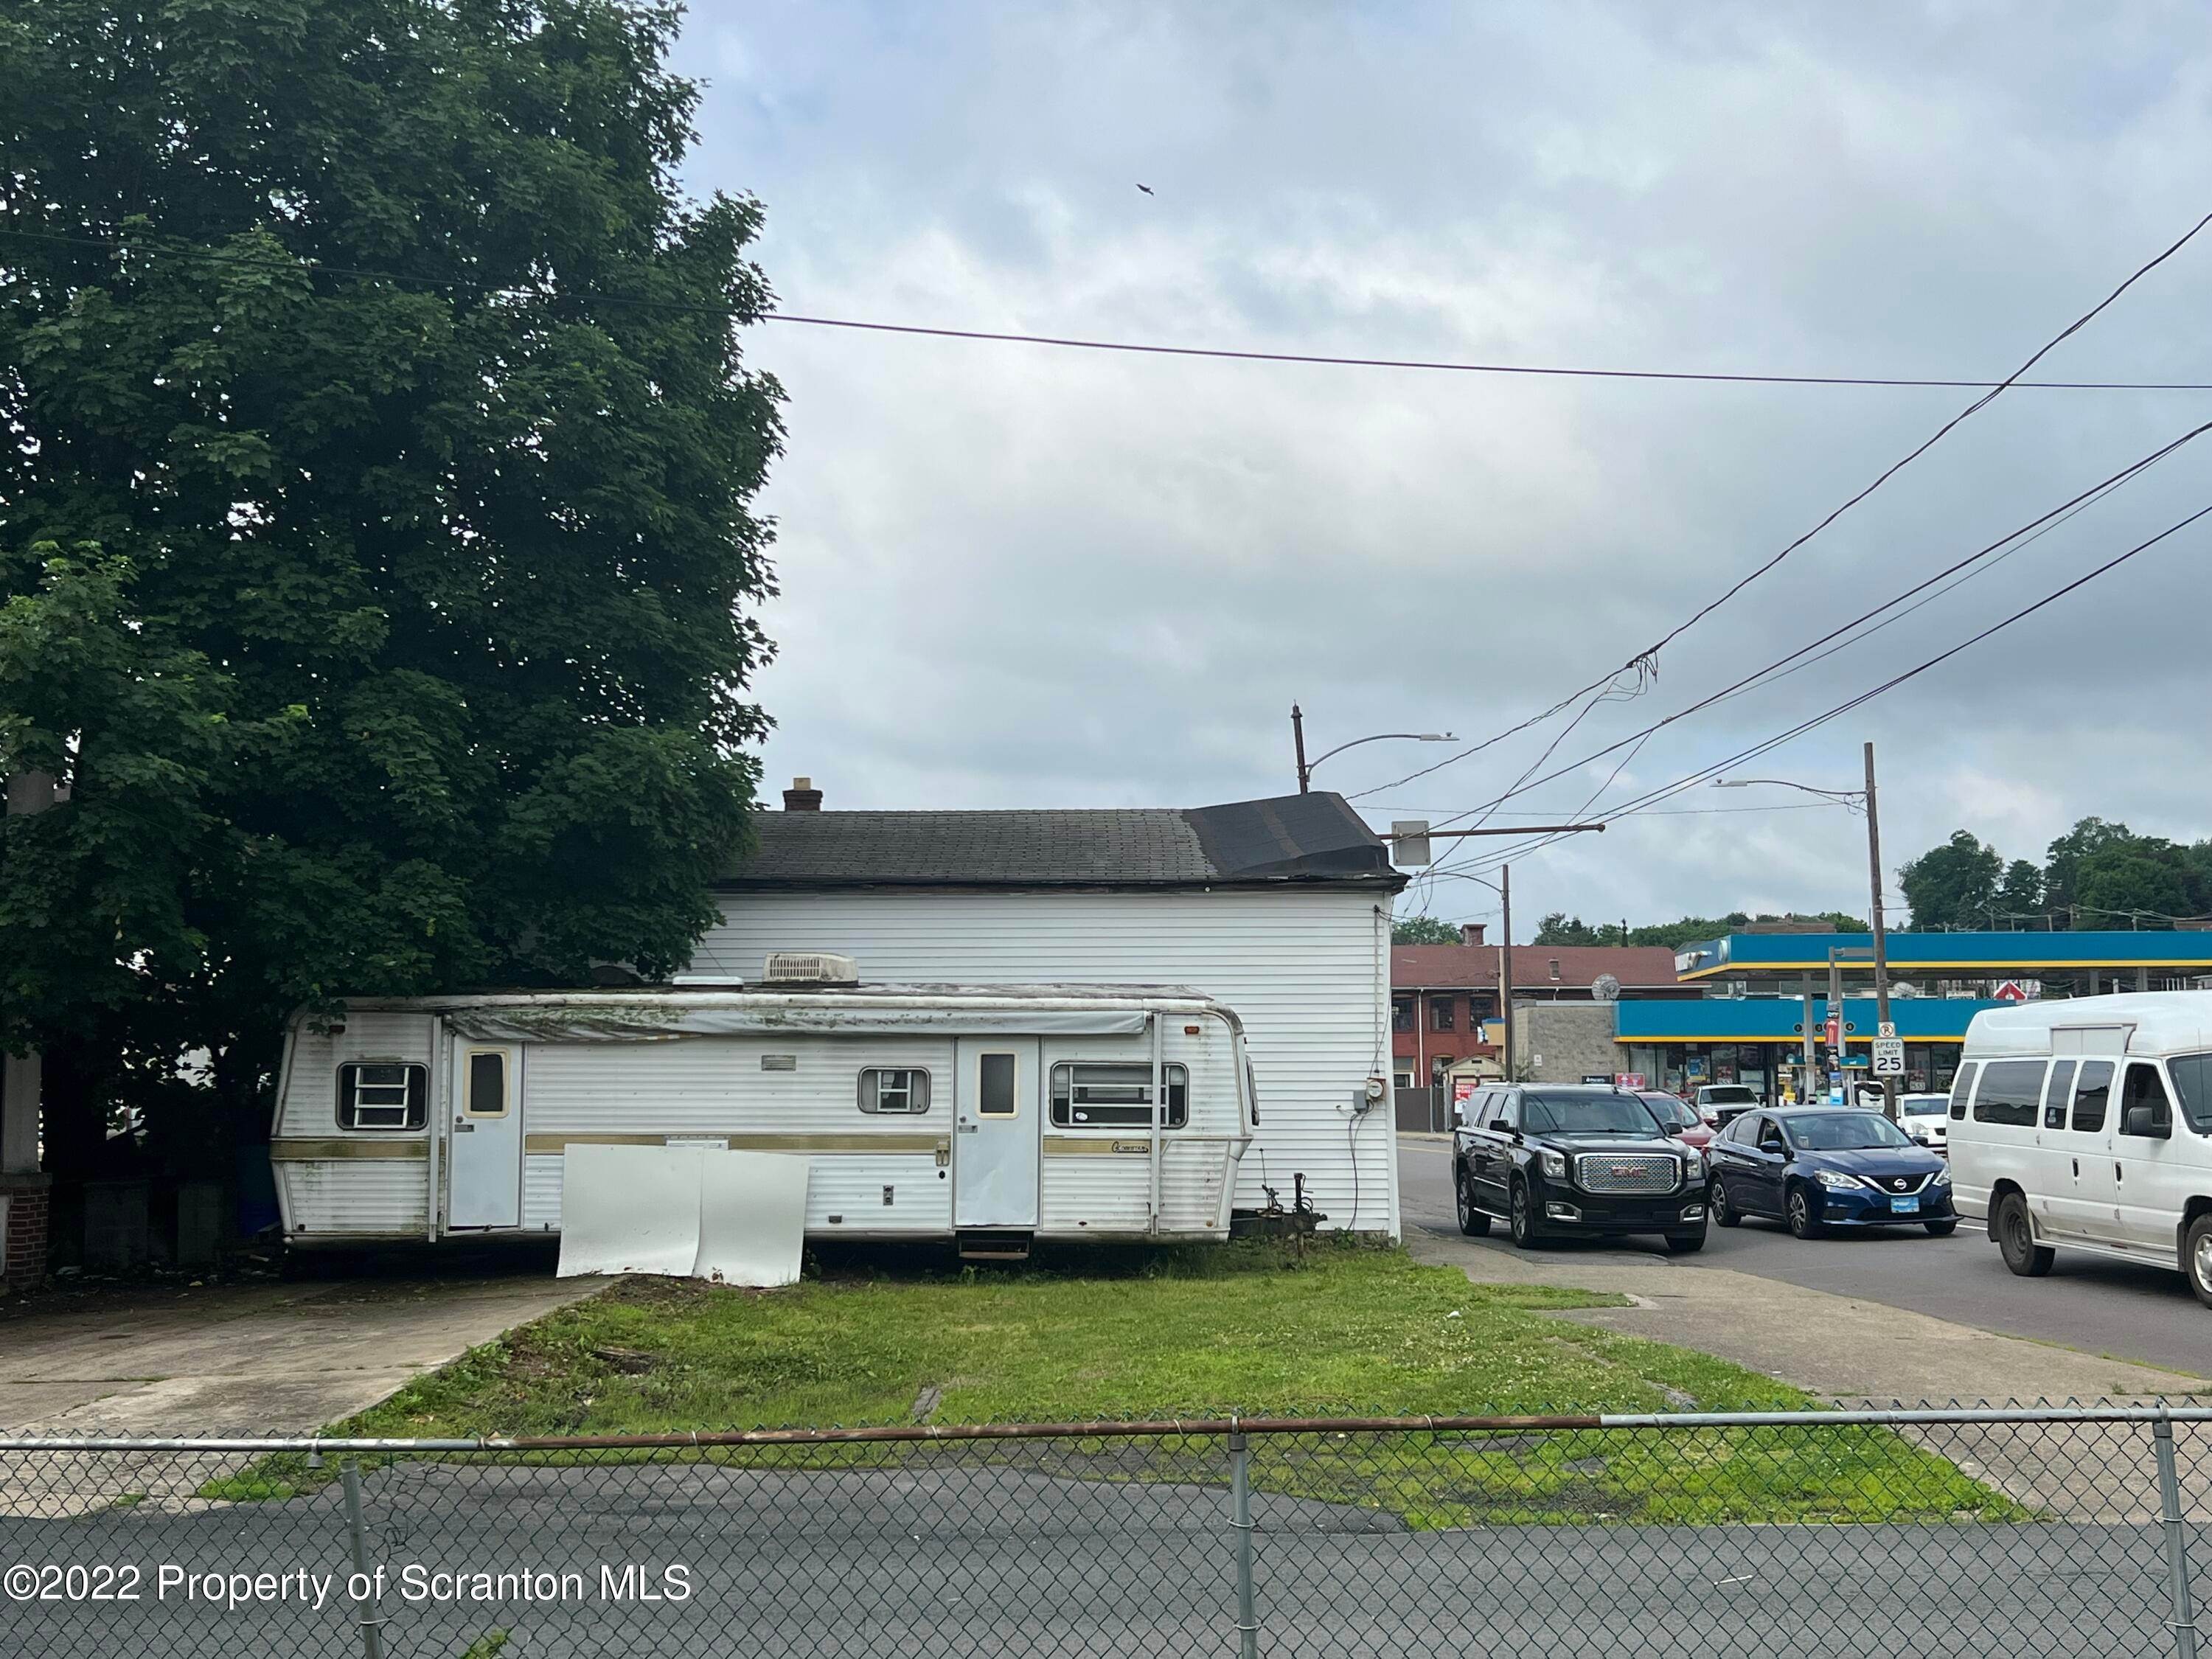 3. Commercial for Sale at 1344 Providence Rd Scranton, Pennsylvania 18508 United States